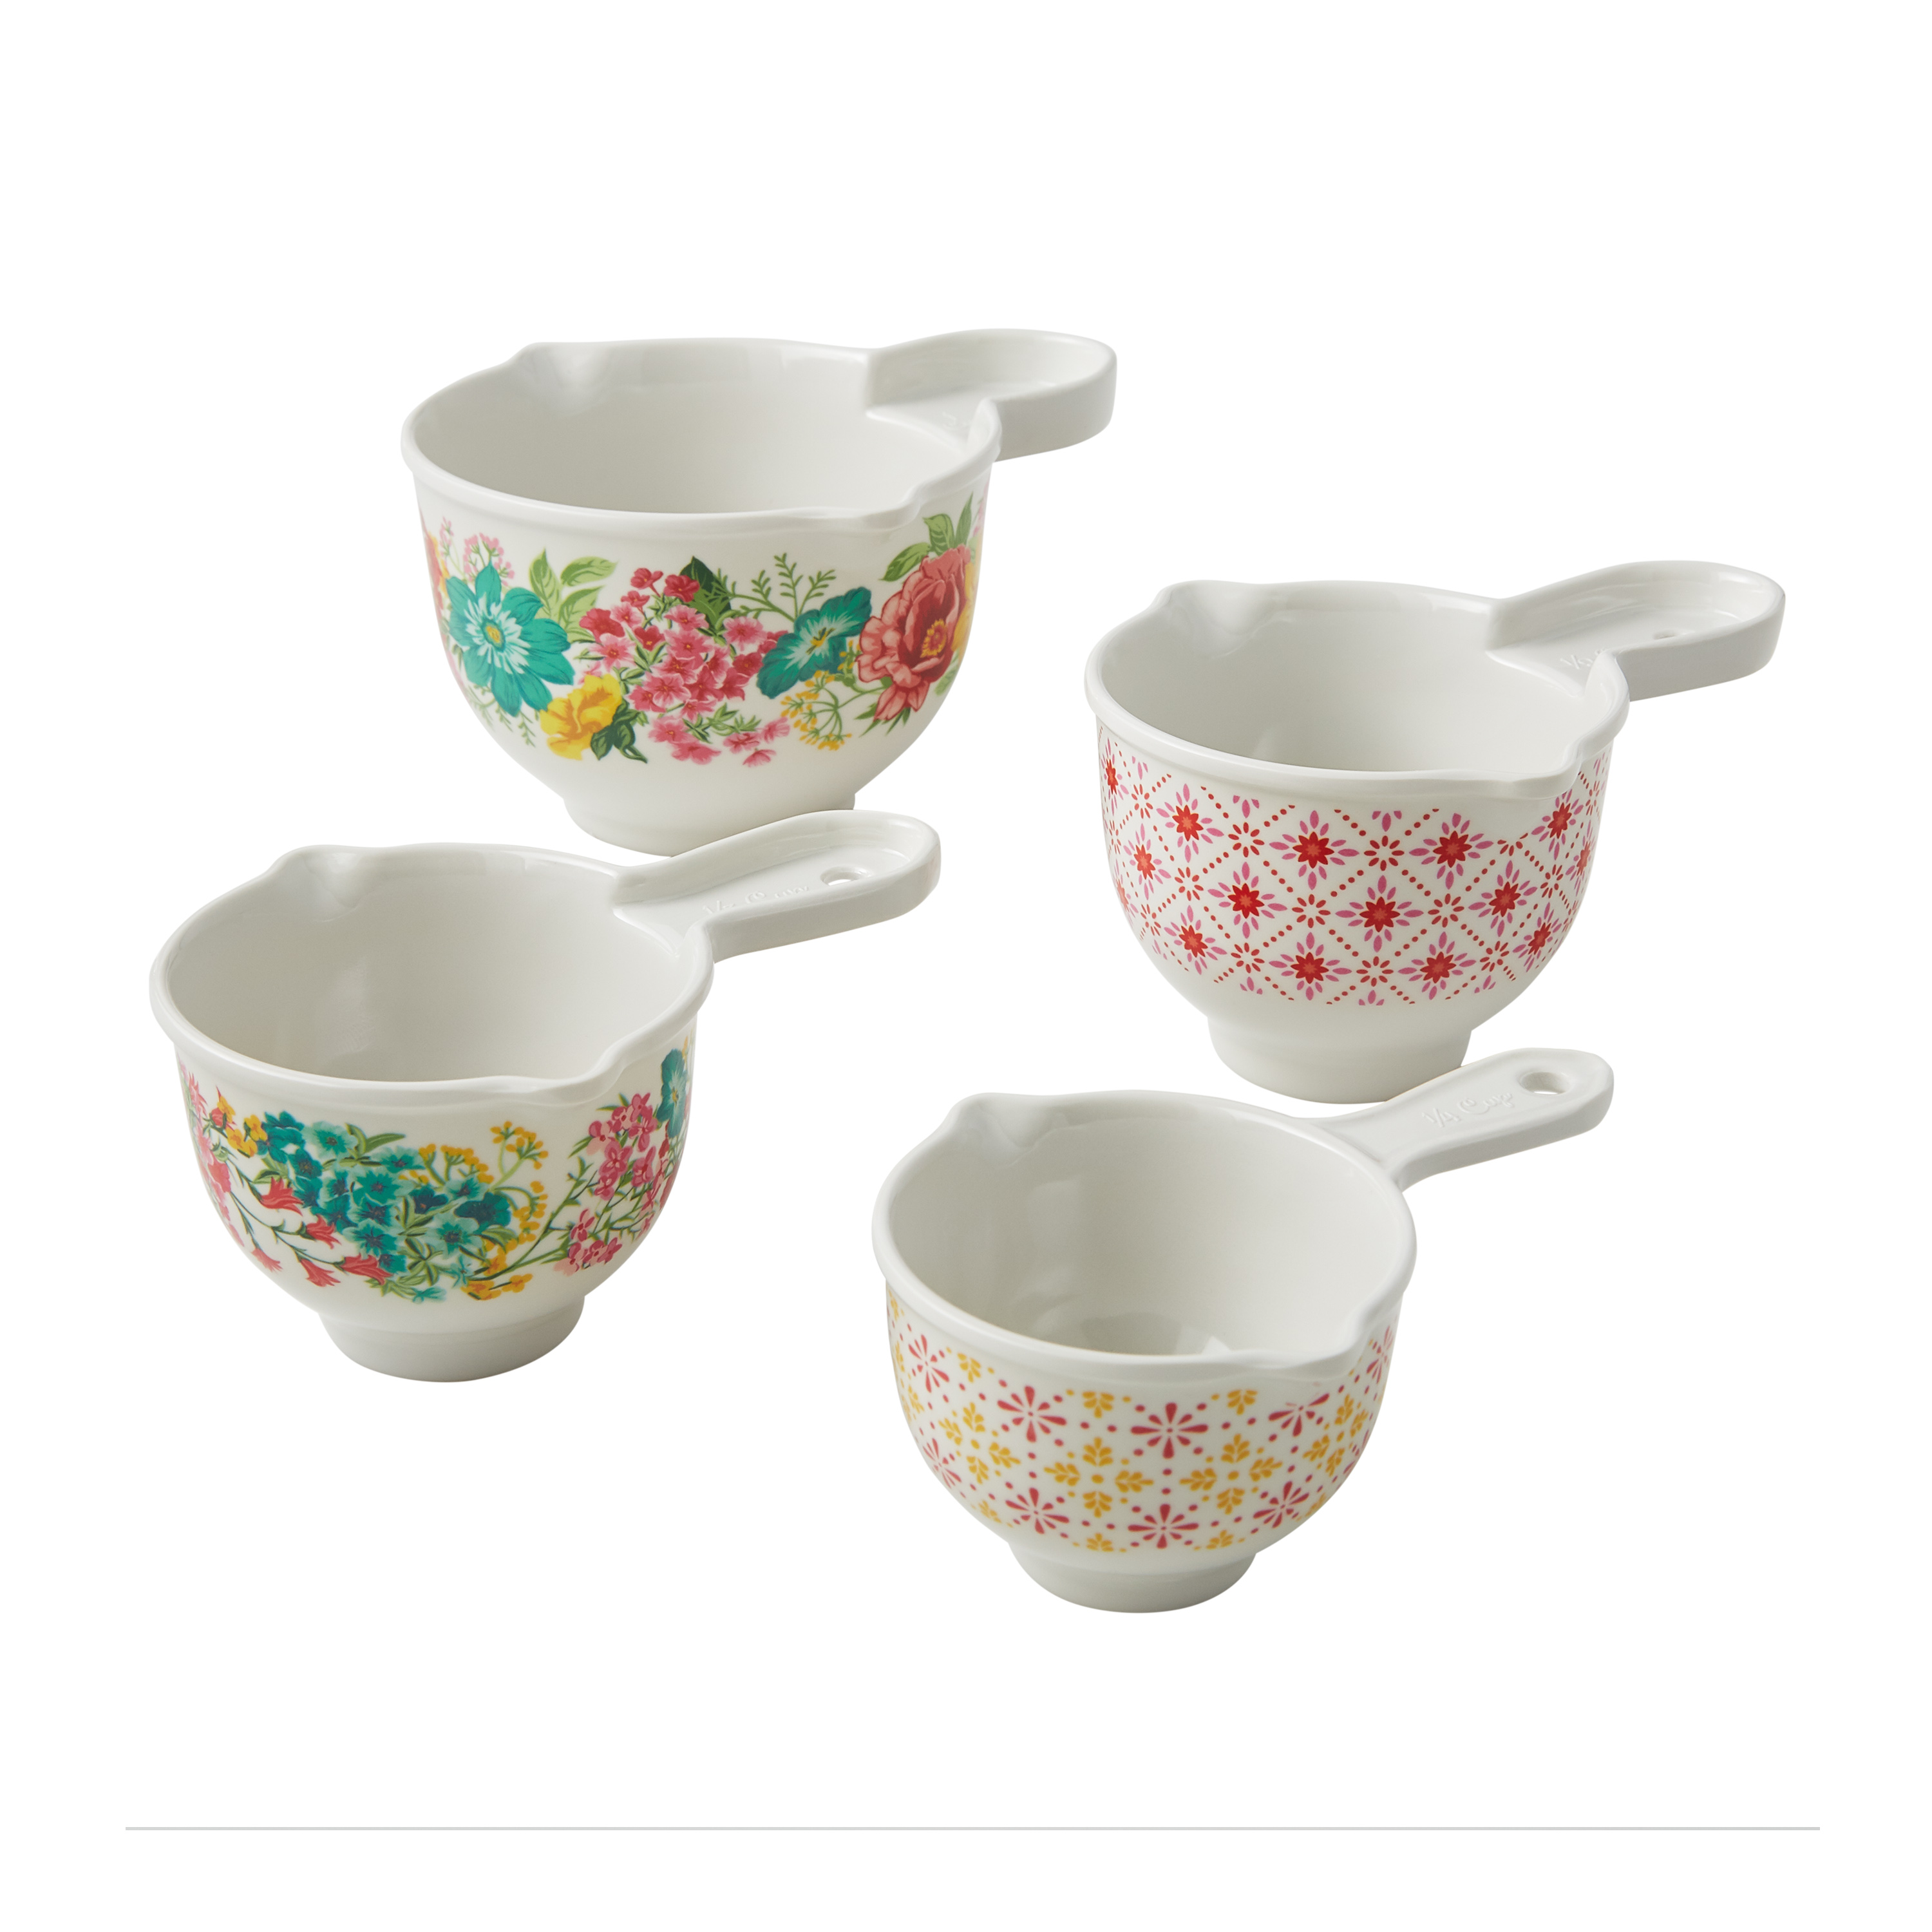 The Pioneer Woman Fancy Flourish 20-Piece Bake & Prep Set with Baking Dish & Measuring Cups - image 2 of 8